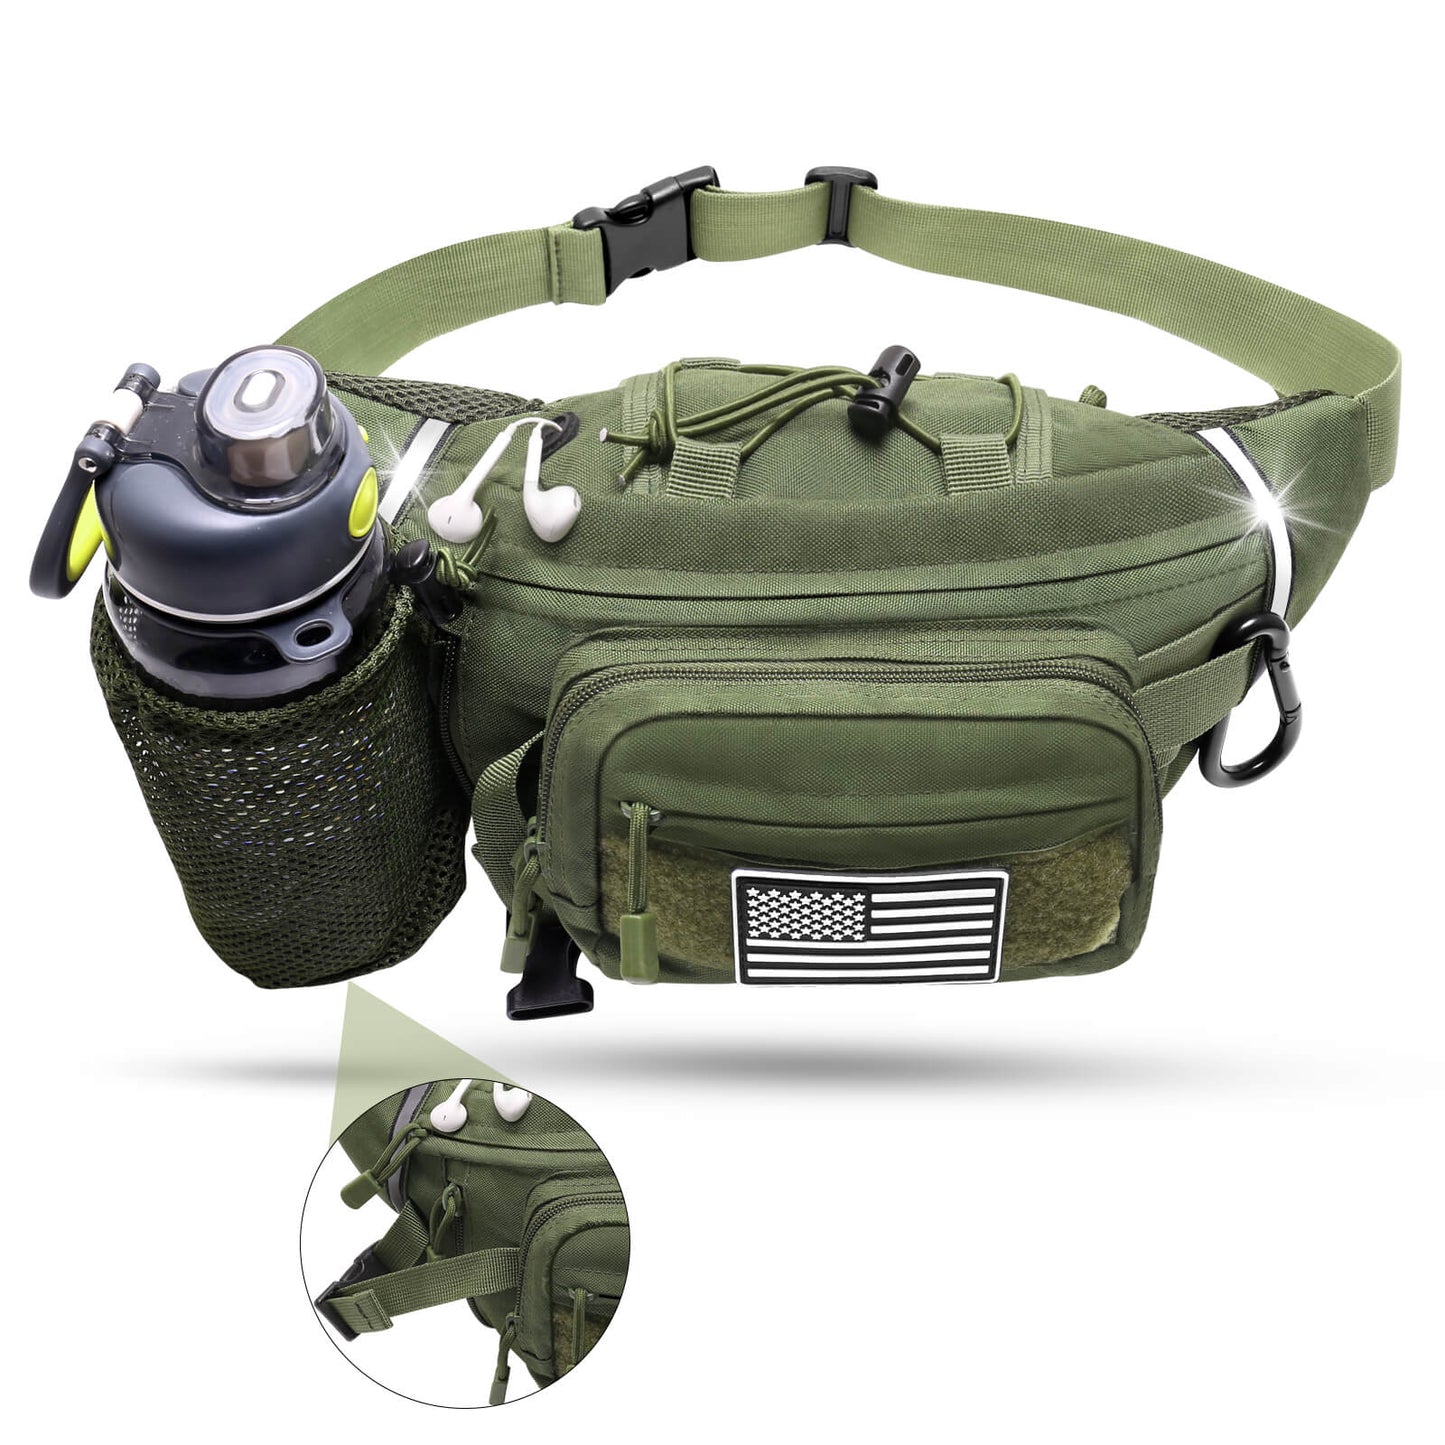 Hiking Waist Bag with Water Bottle Holder